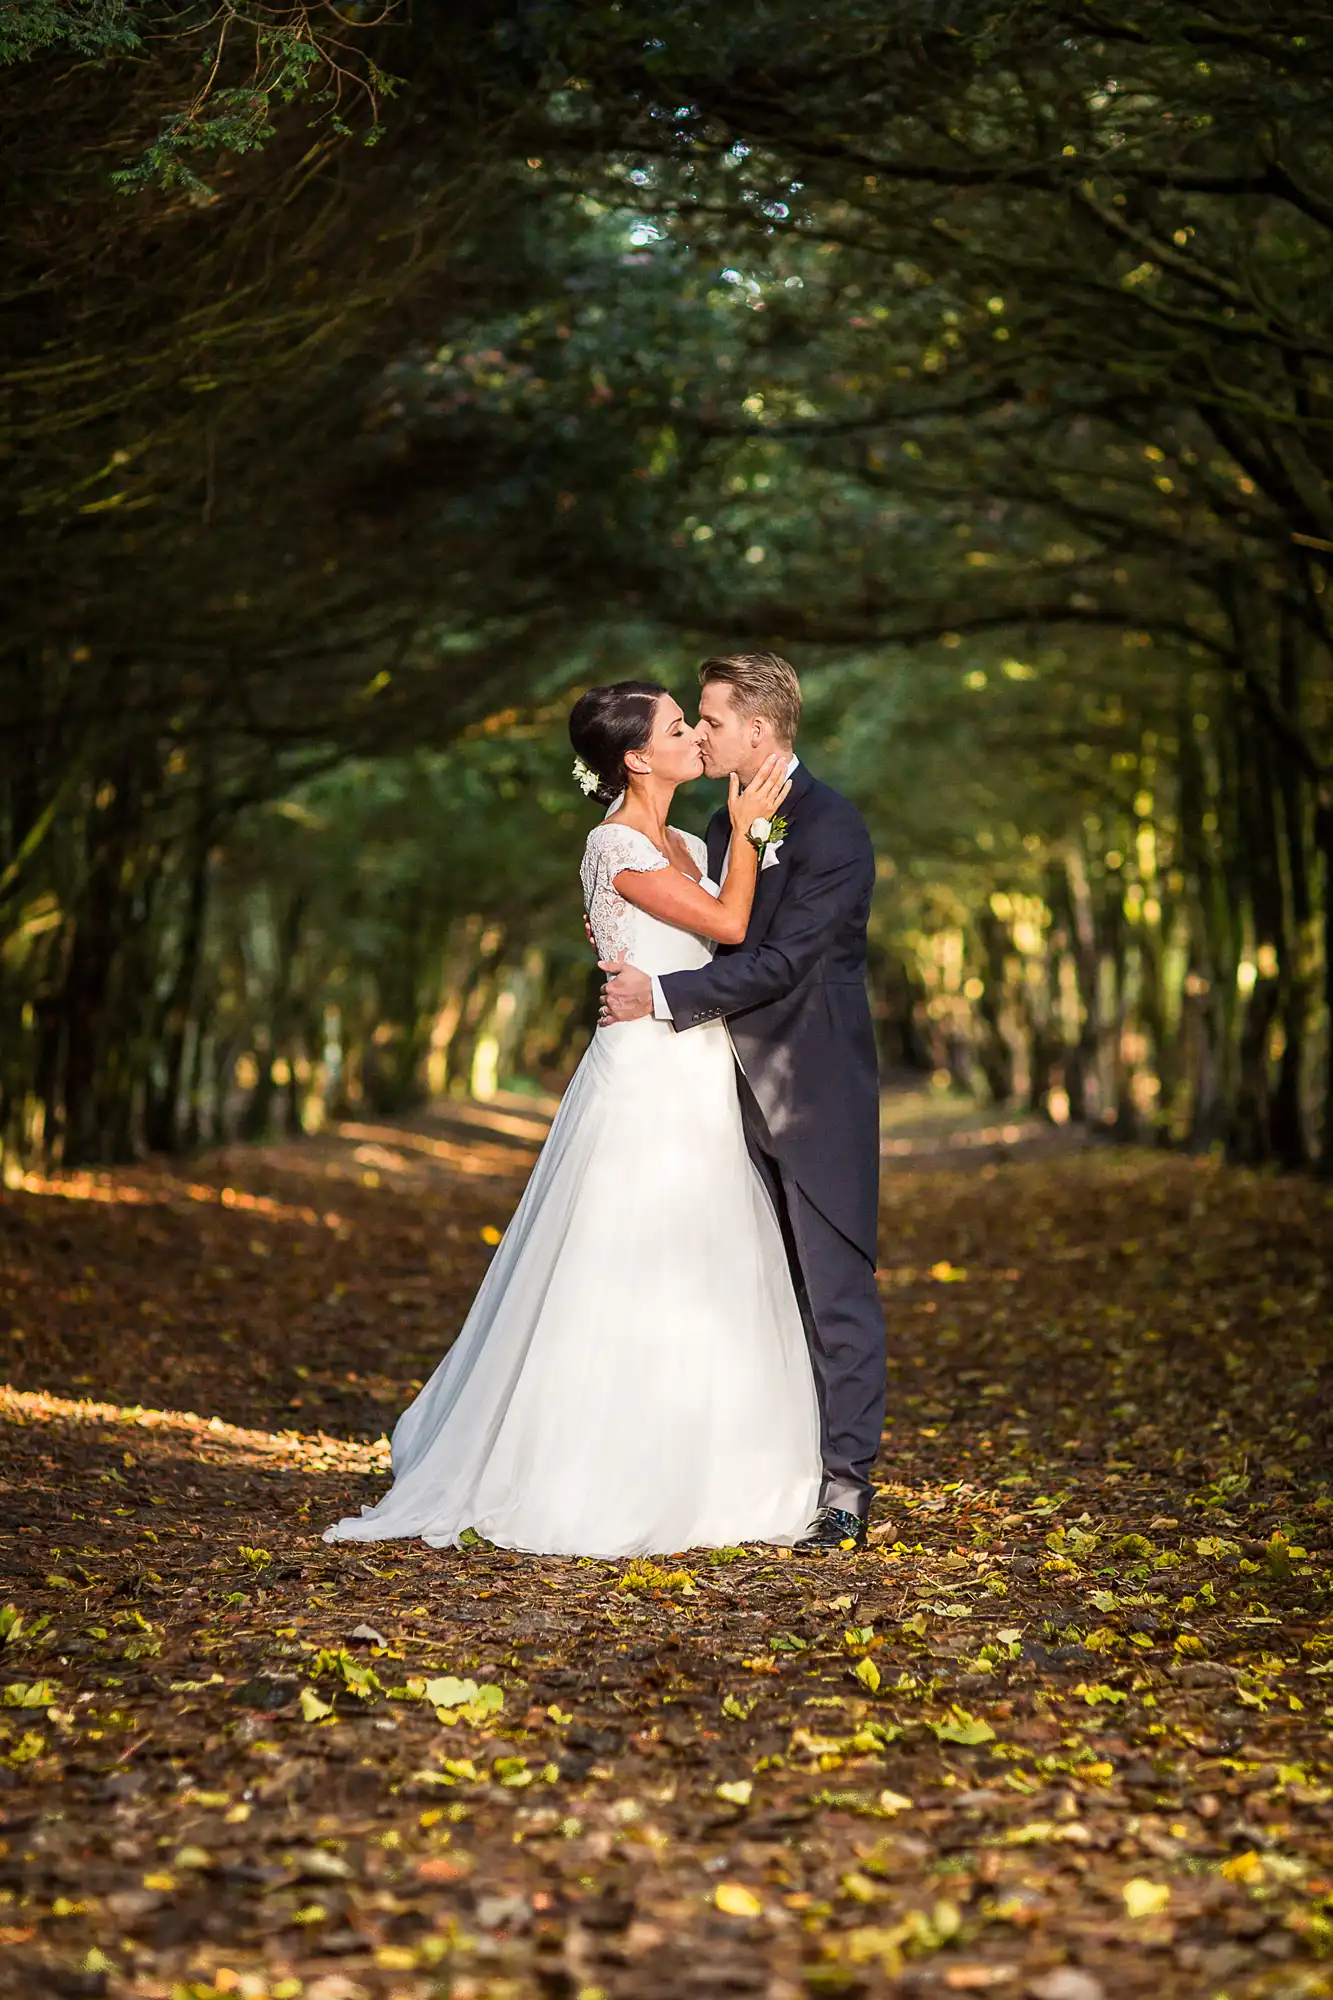 A bride and groom kissing in a forest pathway lined with trees and sunlight filtering through the leaves, with fallen autumn leaves scattered around.